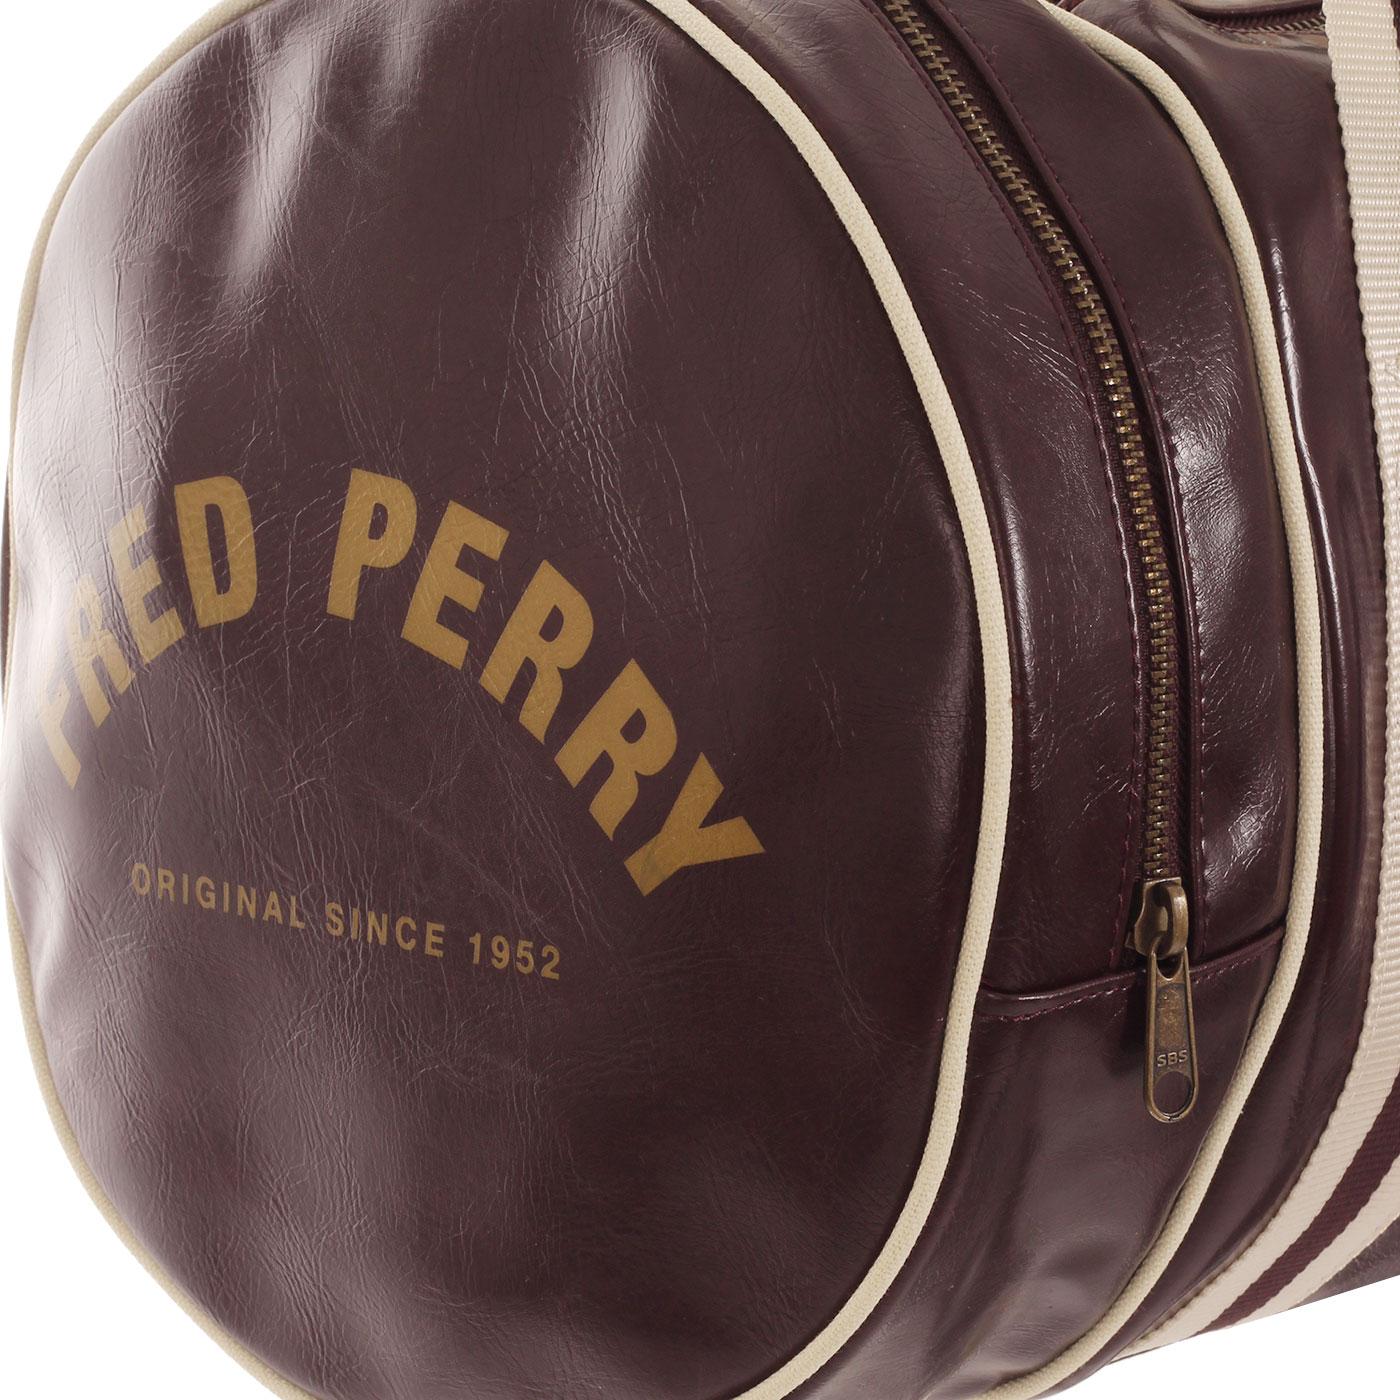 FRED PERRY Classic Retro Barrel Bag in Maroon